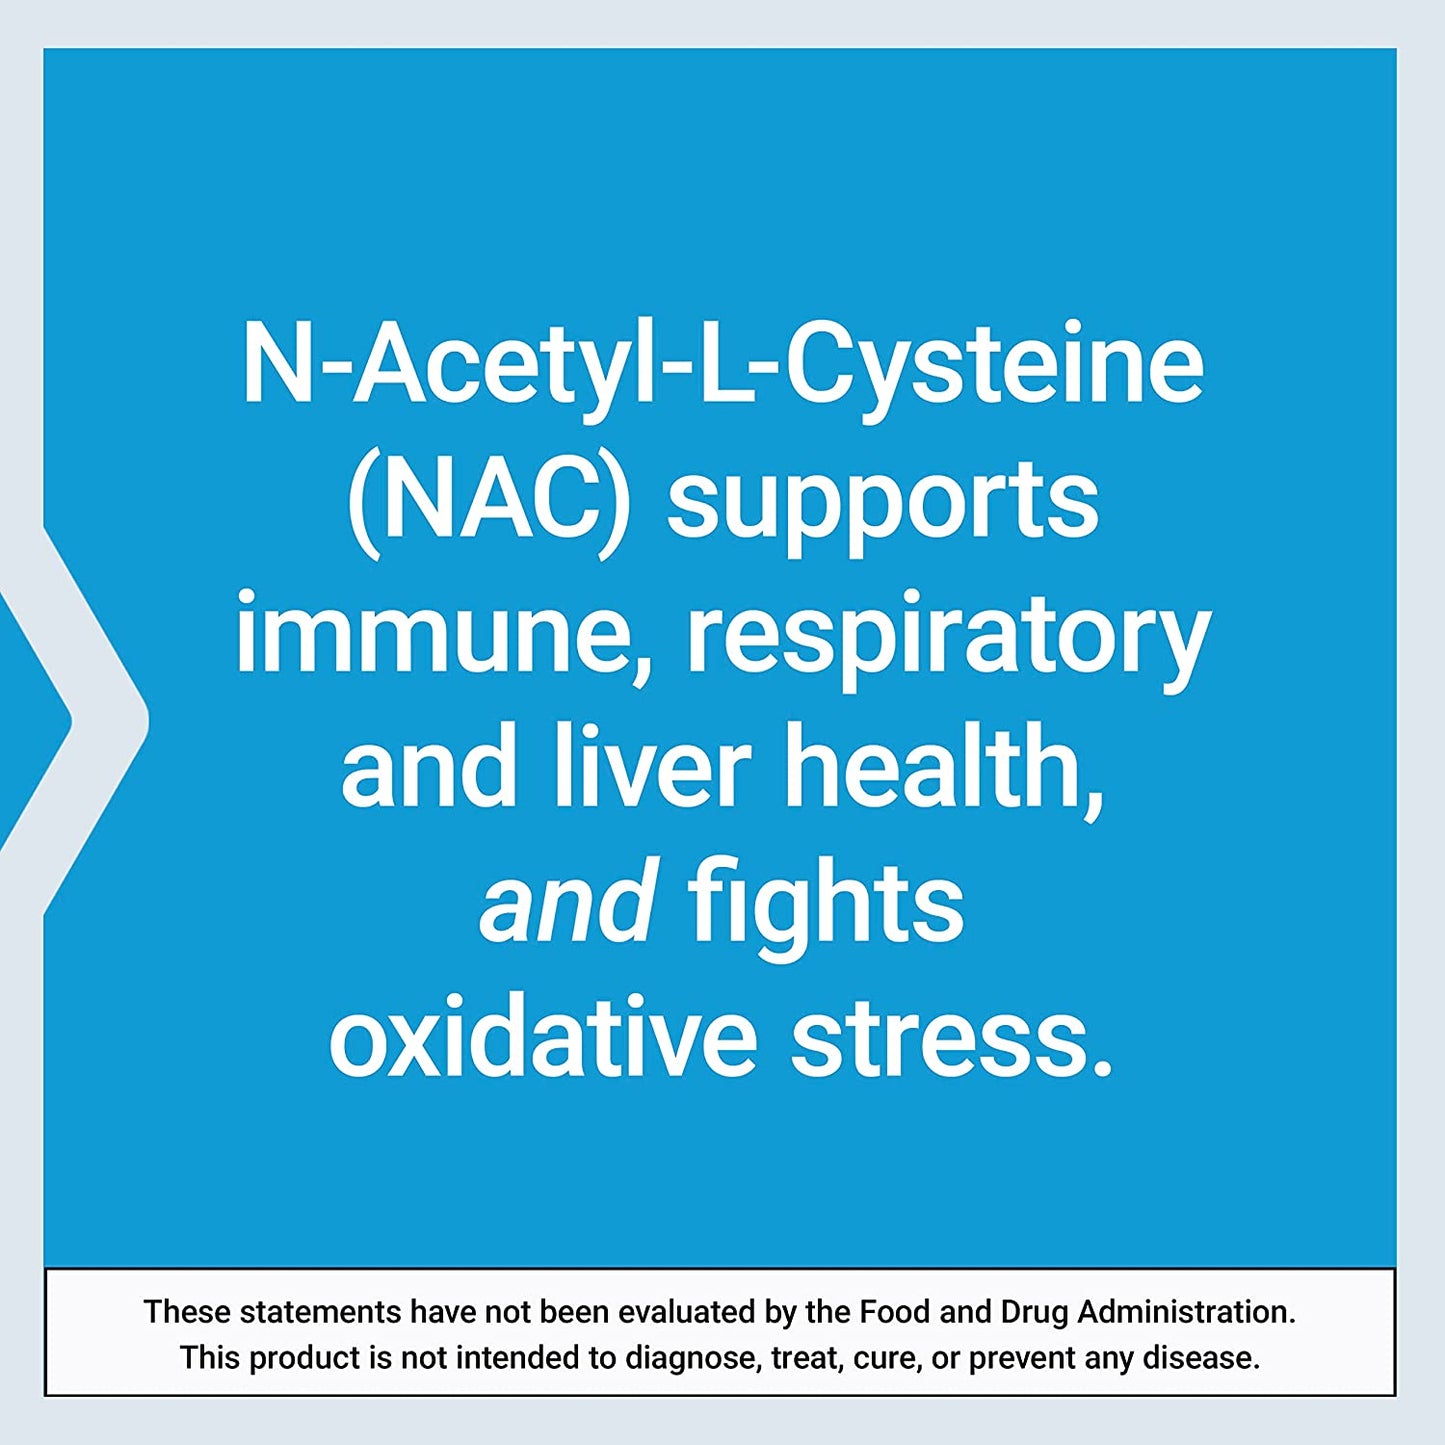 Life Extension N-Acetyl-L-Cysteine (NAC), Immune, Respiratory, Liver Health, NAC 600 Mg, Potent Antioxidant Support, Free-Radicals, Easy to Absorb, 60 Capsules